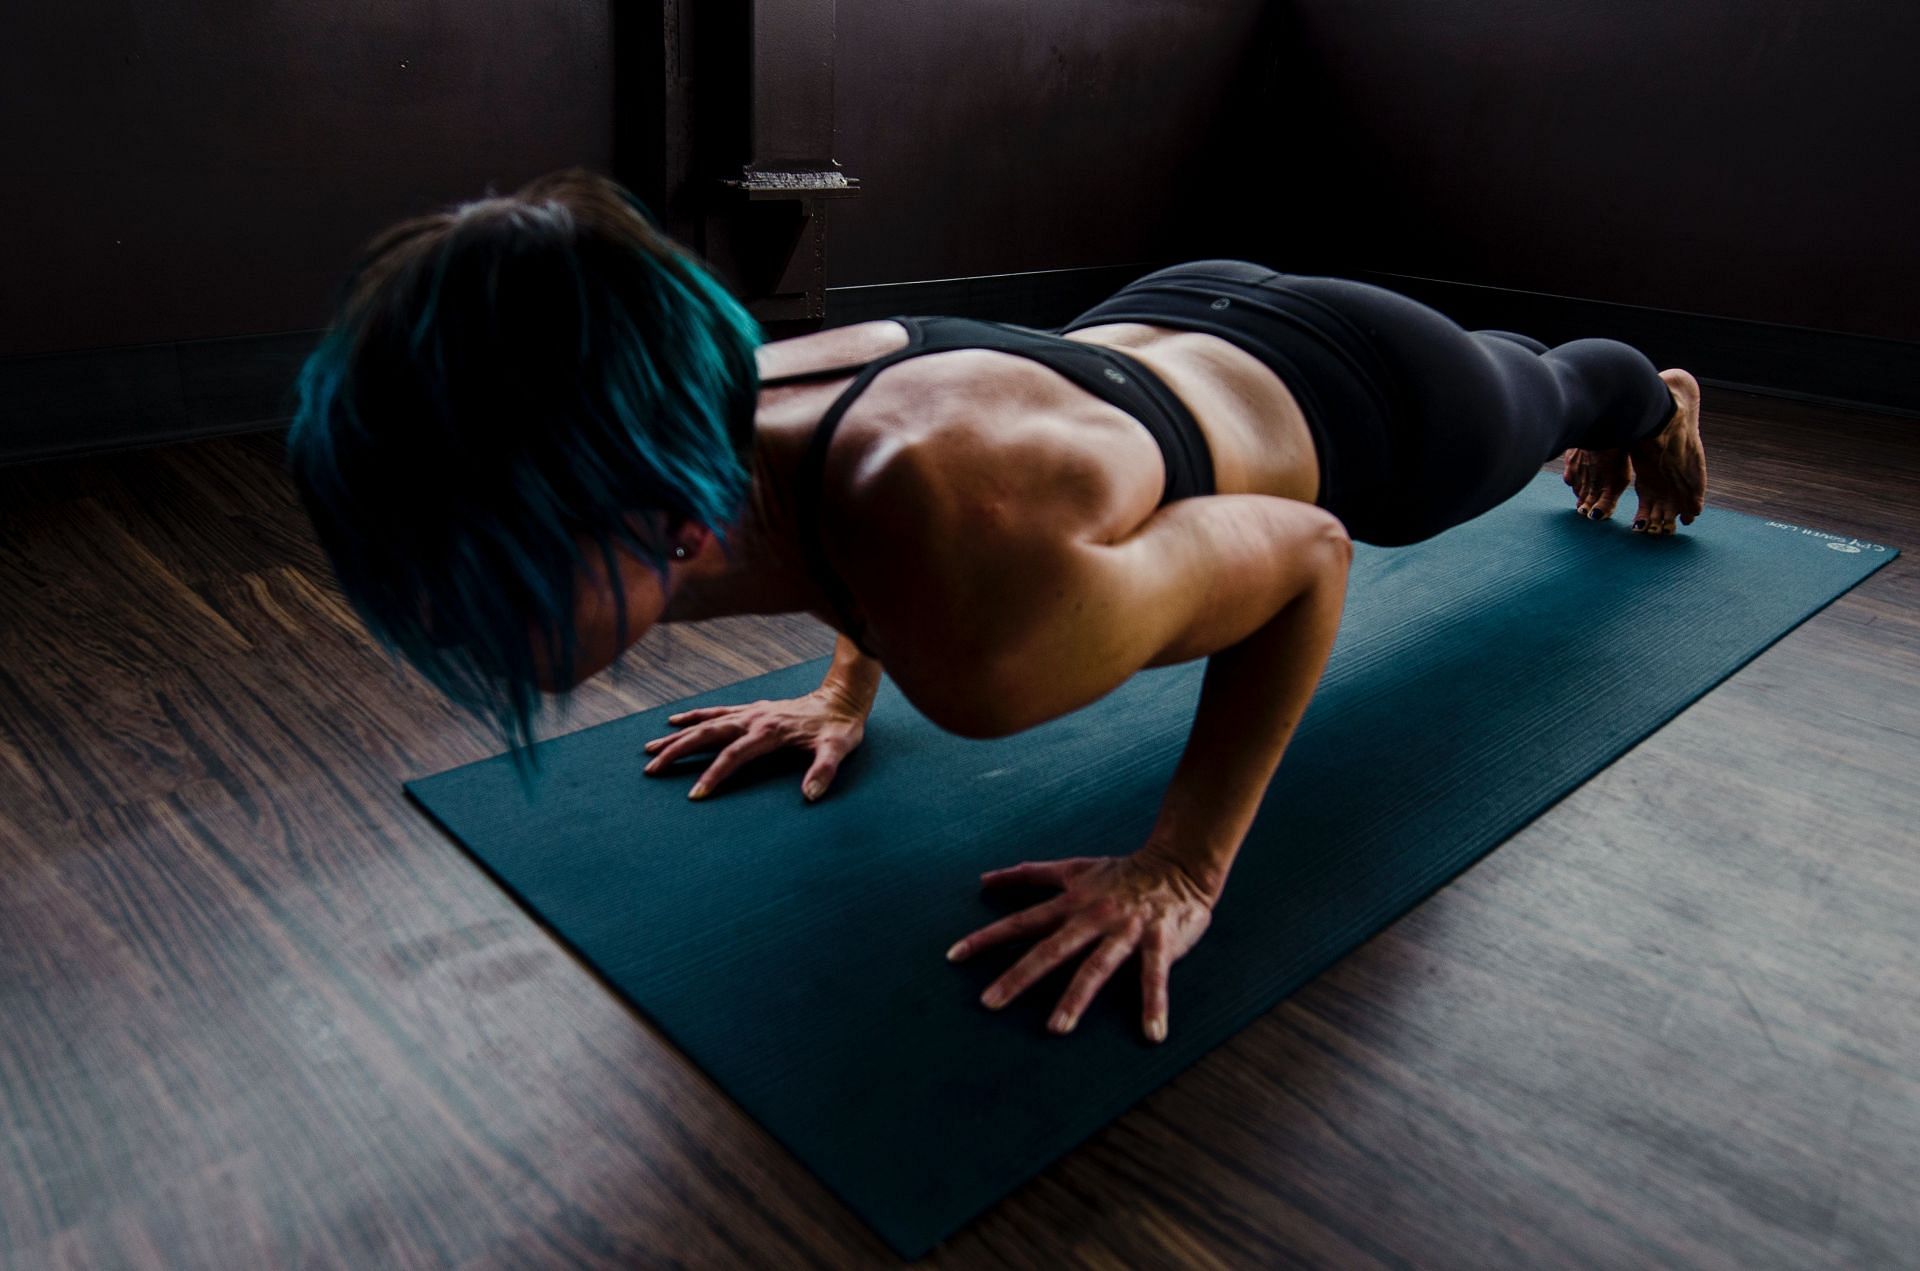 push-ups for chest targets your core muscles. (Image via Pexels / Karl Solano)